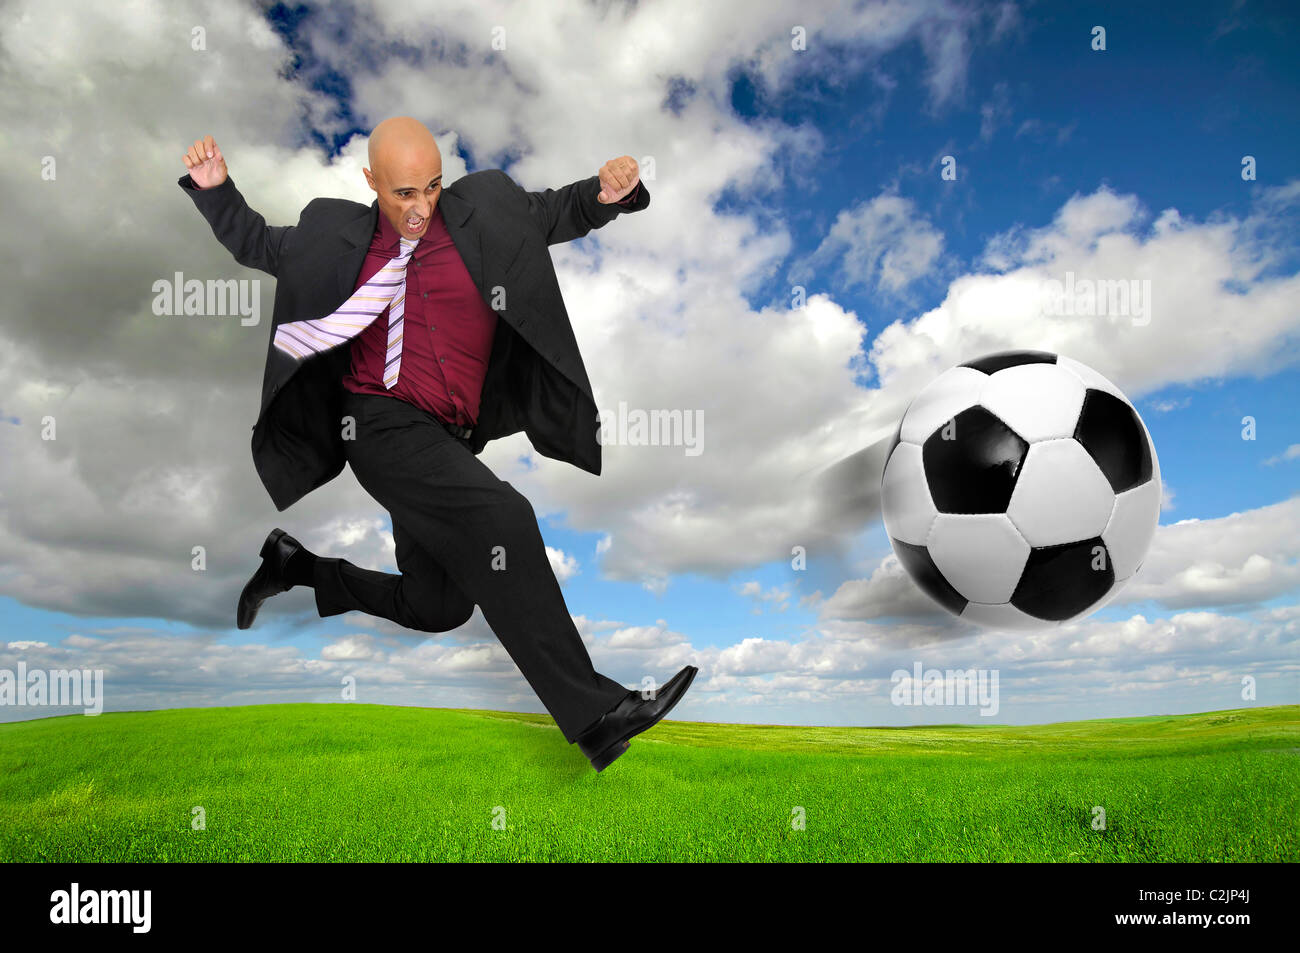 Businessman in a acrobatic pose kicking a soccer ball in a green field  Stock Photo - Alamy